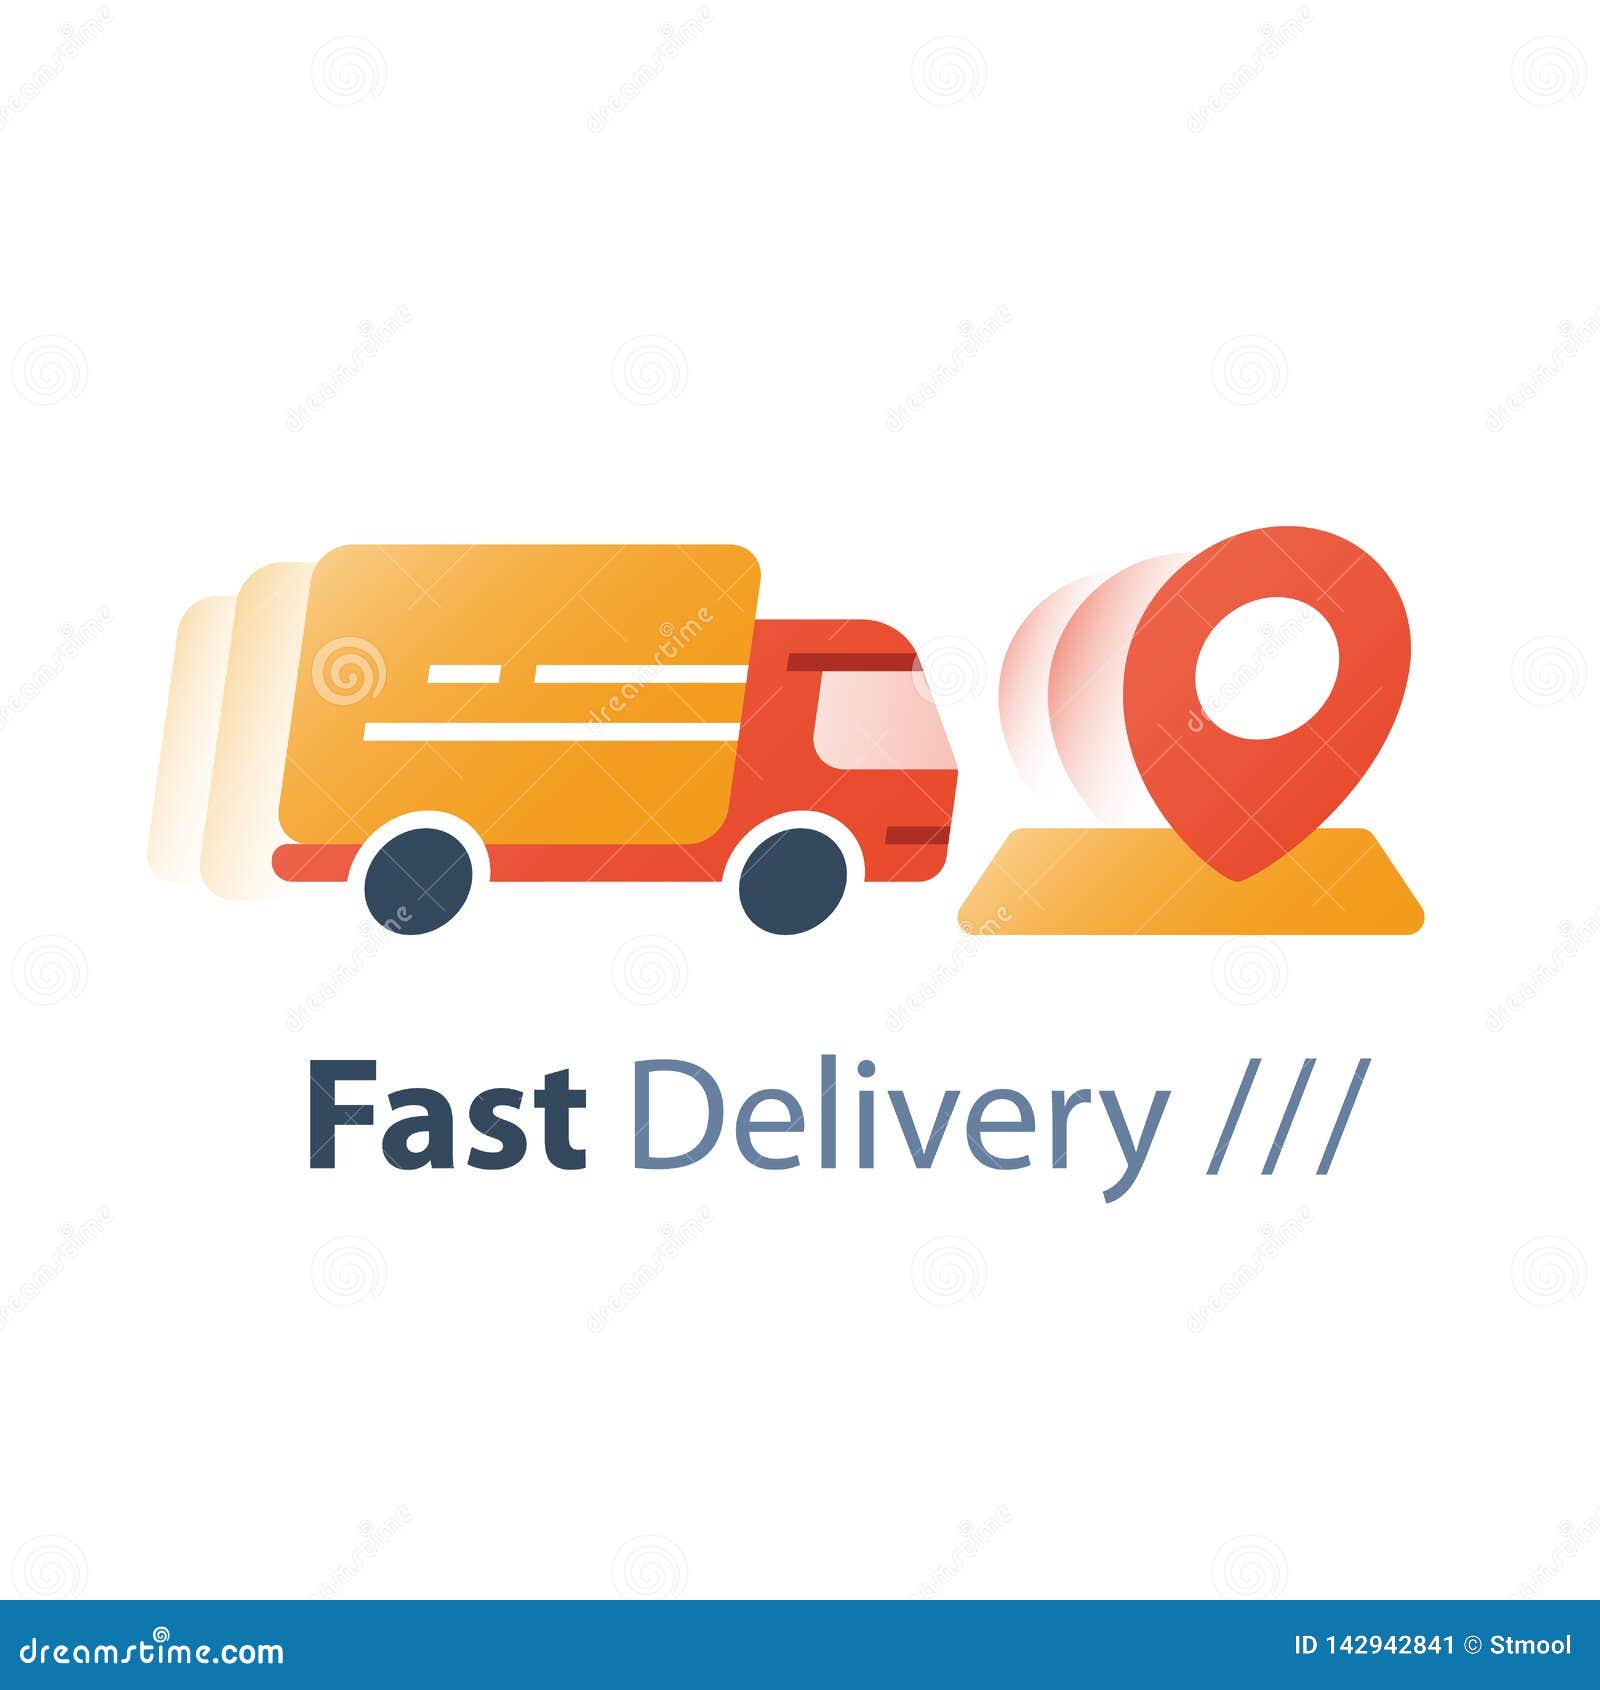 Express Shipping Order, Truck in Motion, Delivery Services, Fast ...